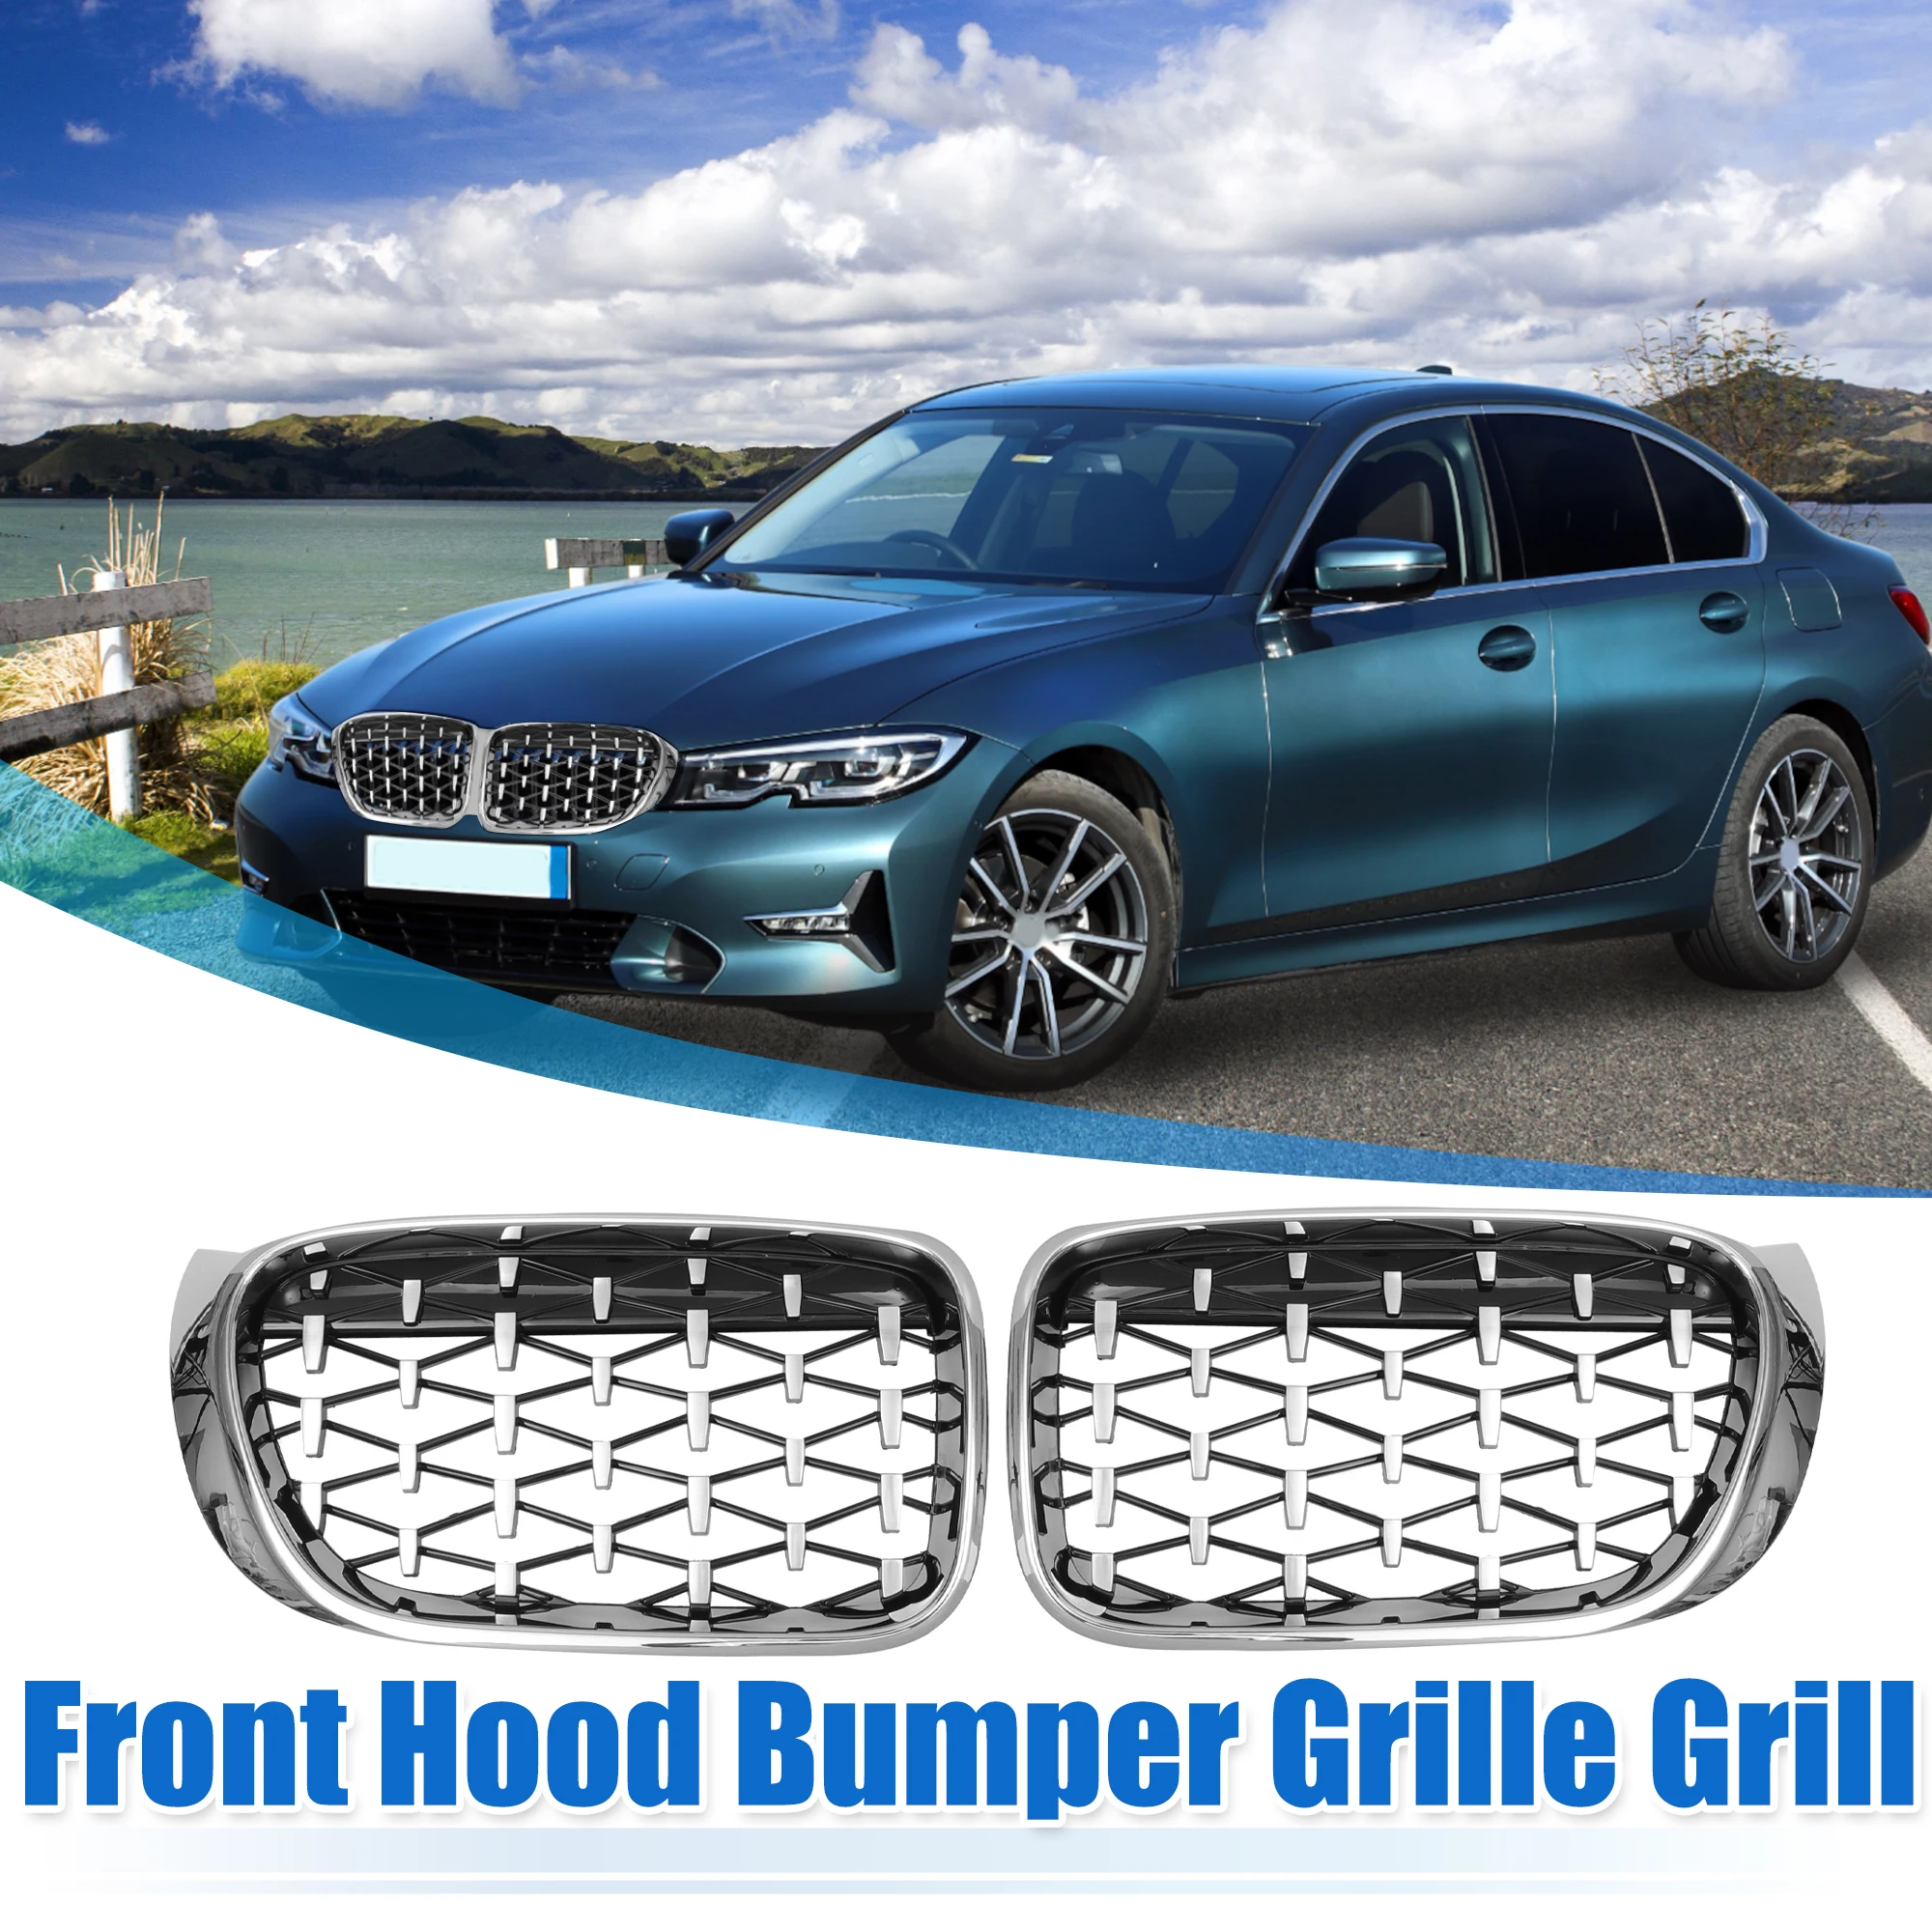 

UXCELL 1 Pair Front Hood Bumper Grille Grill for BMW x3 f25 2014 2015 2016 2017 51117338571/51117338572 Silver Tone